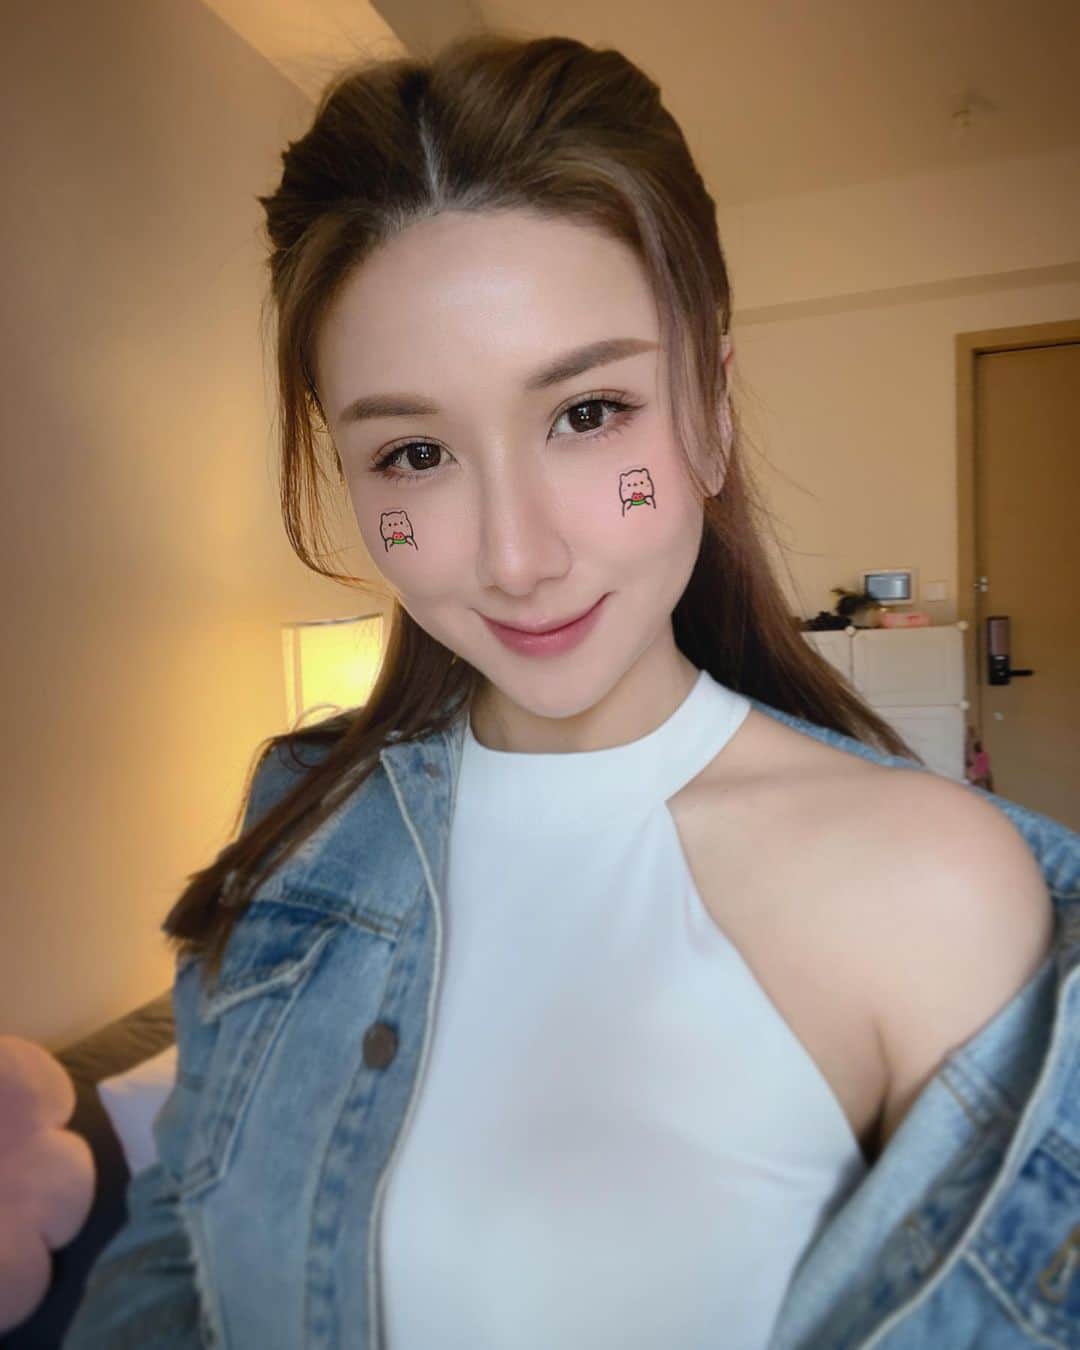 Chloe Yuenのインスタグラム：「HELLO STRANGERS 😝 Have you missed me?  I took a break from the internet. But I’m back, let’s play and leave me a comment.  It’s Friday night, who’s doing what?! 💋  好耐冇post過野 有點陌生 Hello大家好 有冇掛住我呢, (唔好怕羞 請舉手)😝  #showmeyourlove❤️  #missedyouall#pigpig🐽🐷#isback #status#online」